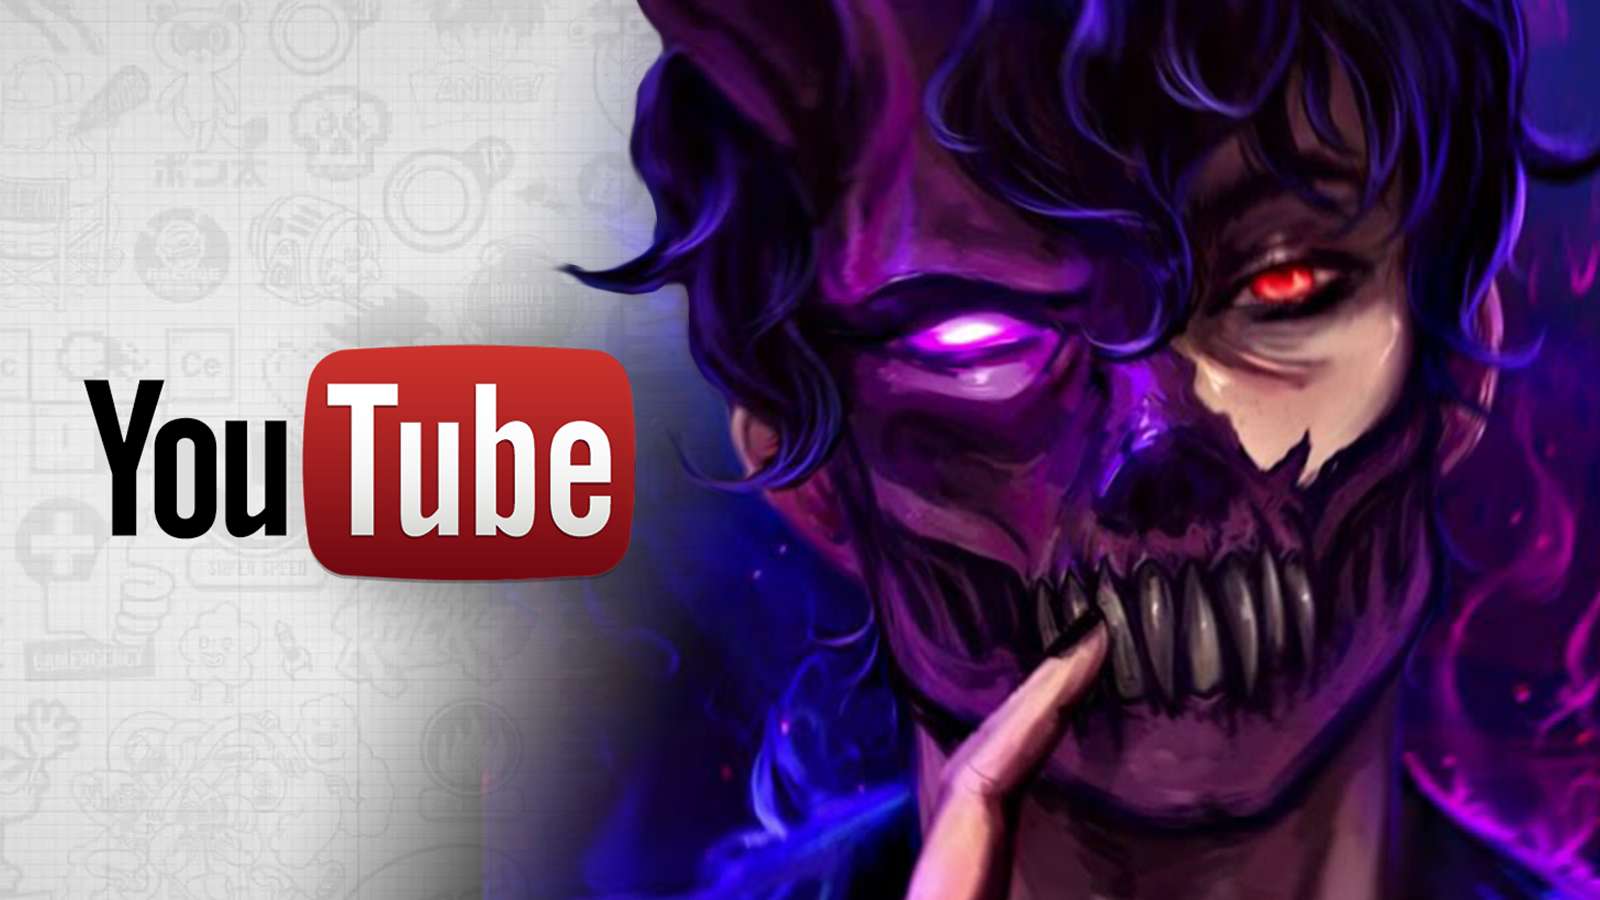 Corpse Husband avatar appears next to YouTube, which he's set to quit.